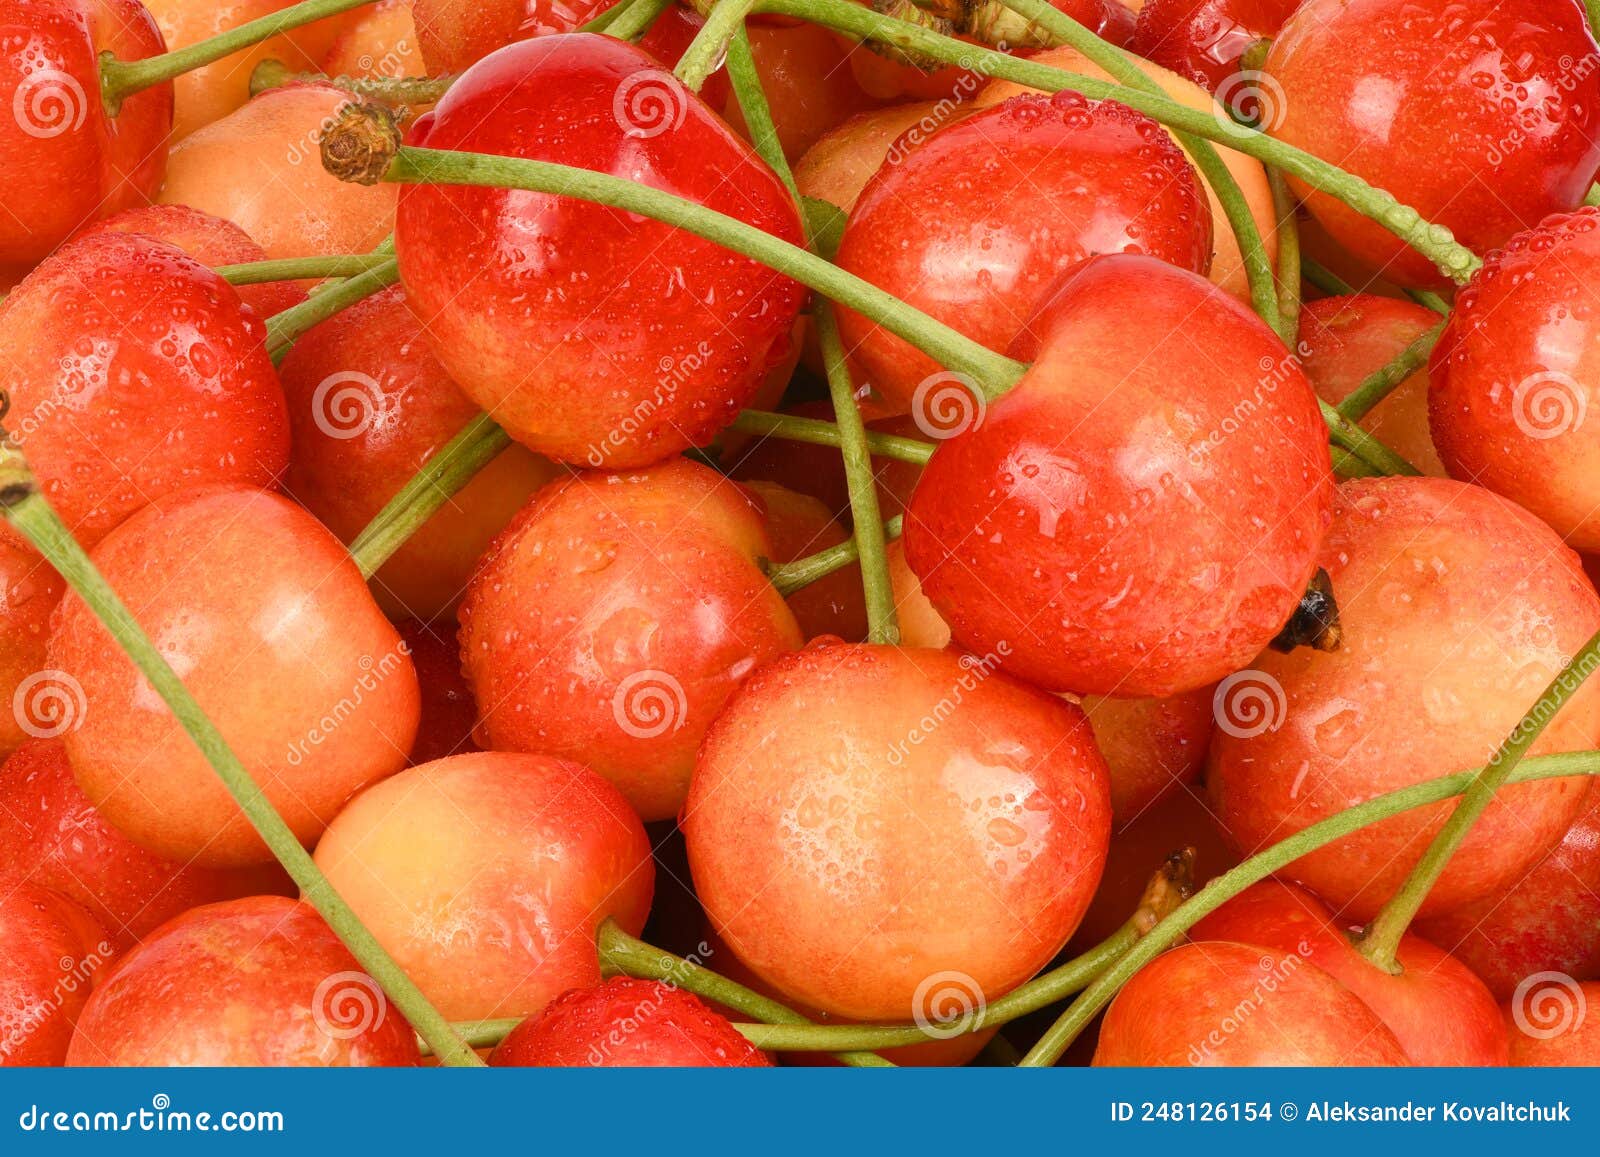 Bunch Of Ripe Cherries With Stems And Leaves Big Collection Of Fresh